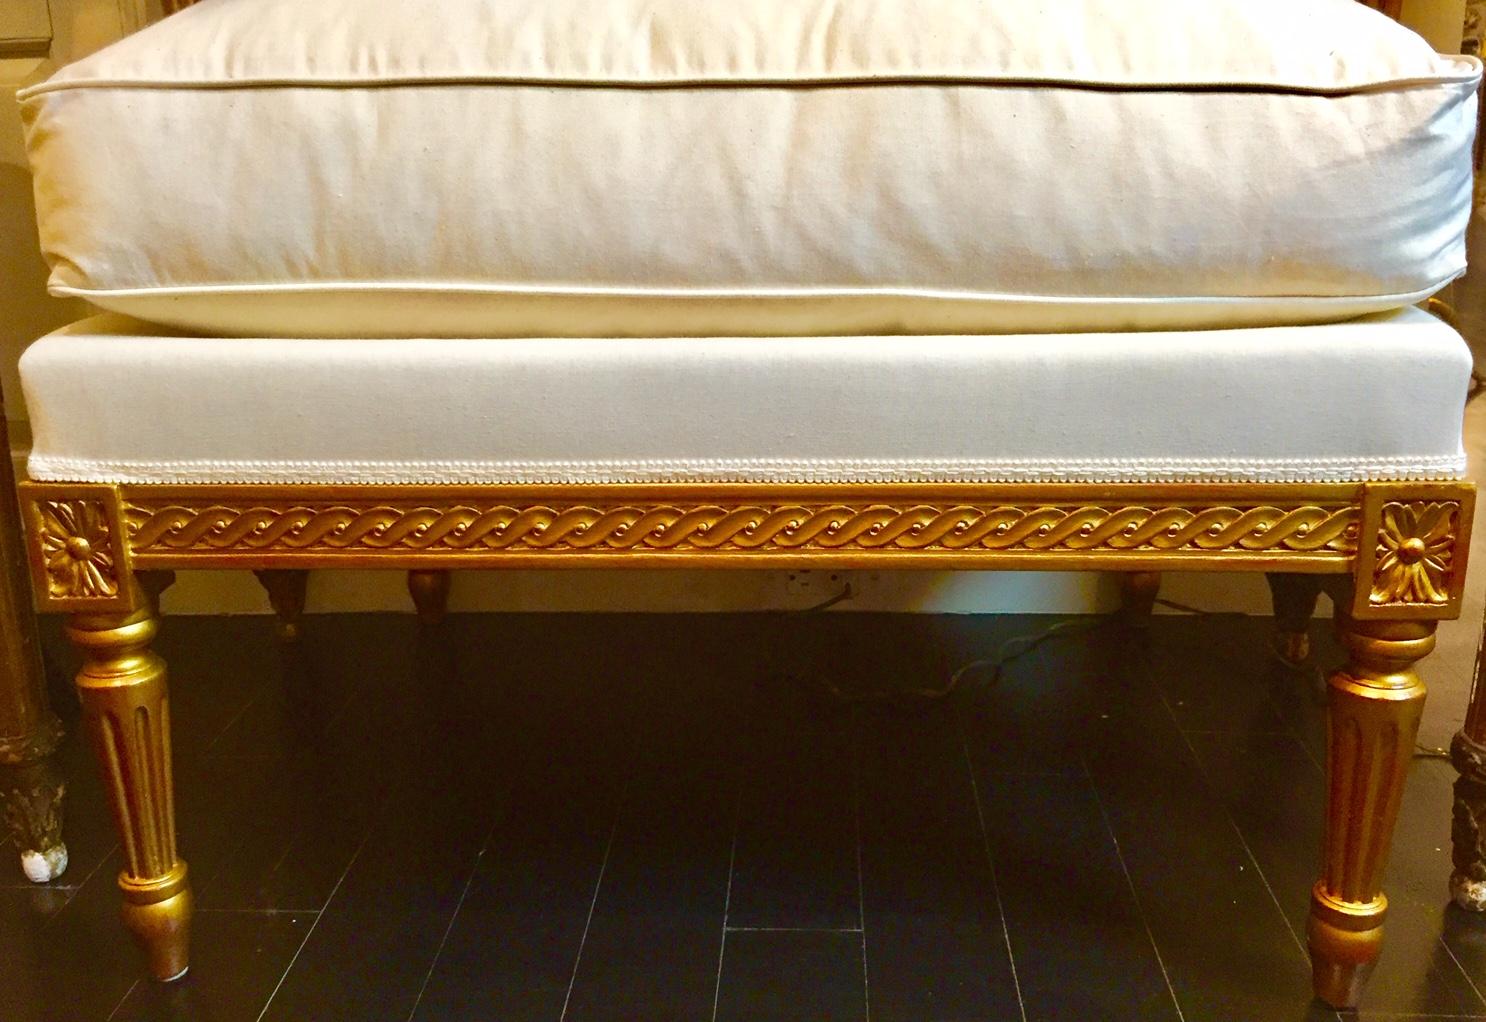 Louis XVI style footstool repose pied, gilt gold
Large footstool, highly decorative, can also be used as extra seating or as an ottoman instead of a coffee table. A great complement to any room.
More than one is available, price per item.